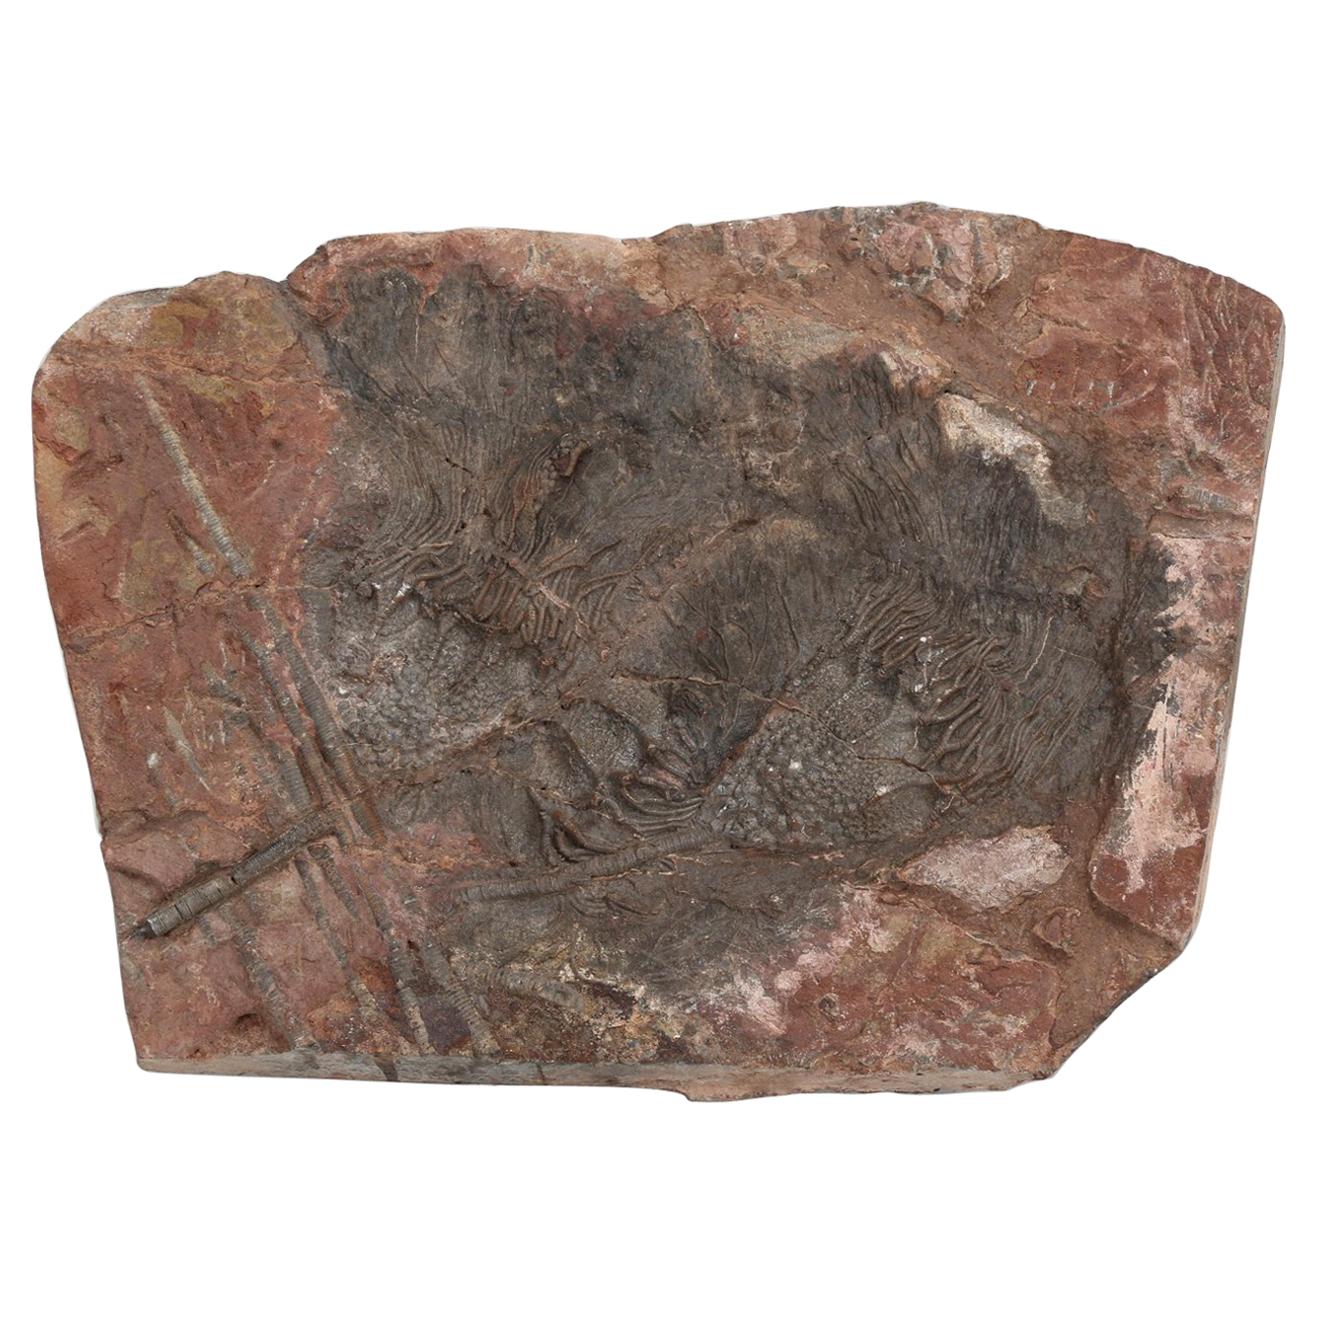 Crinoid Fossil from Morocco, about 450 Million Years Old